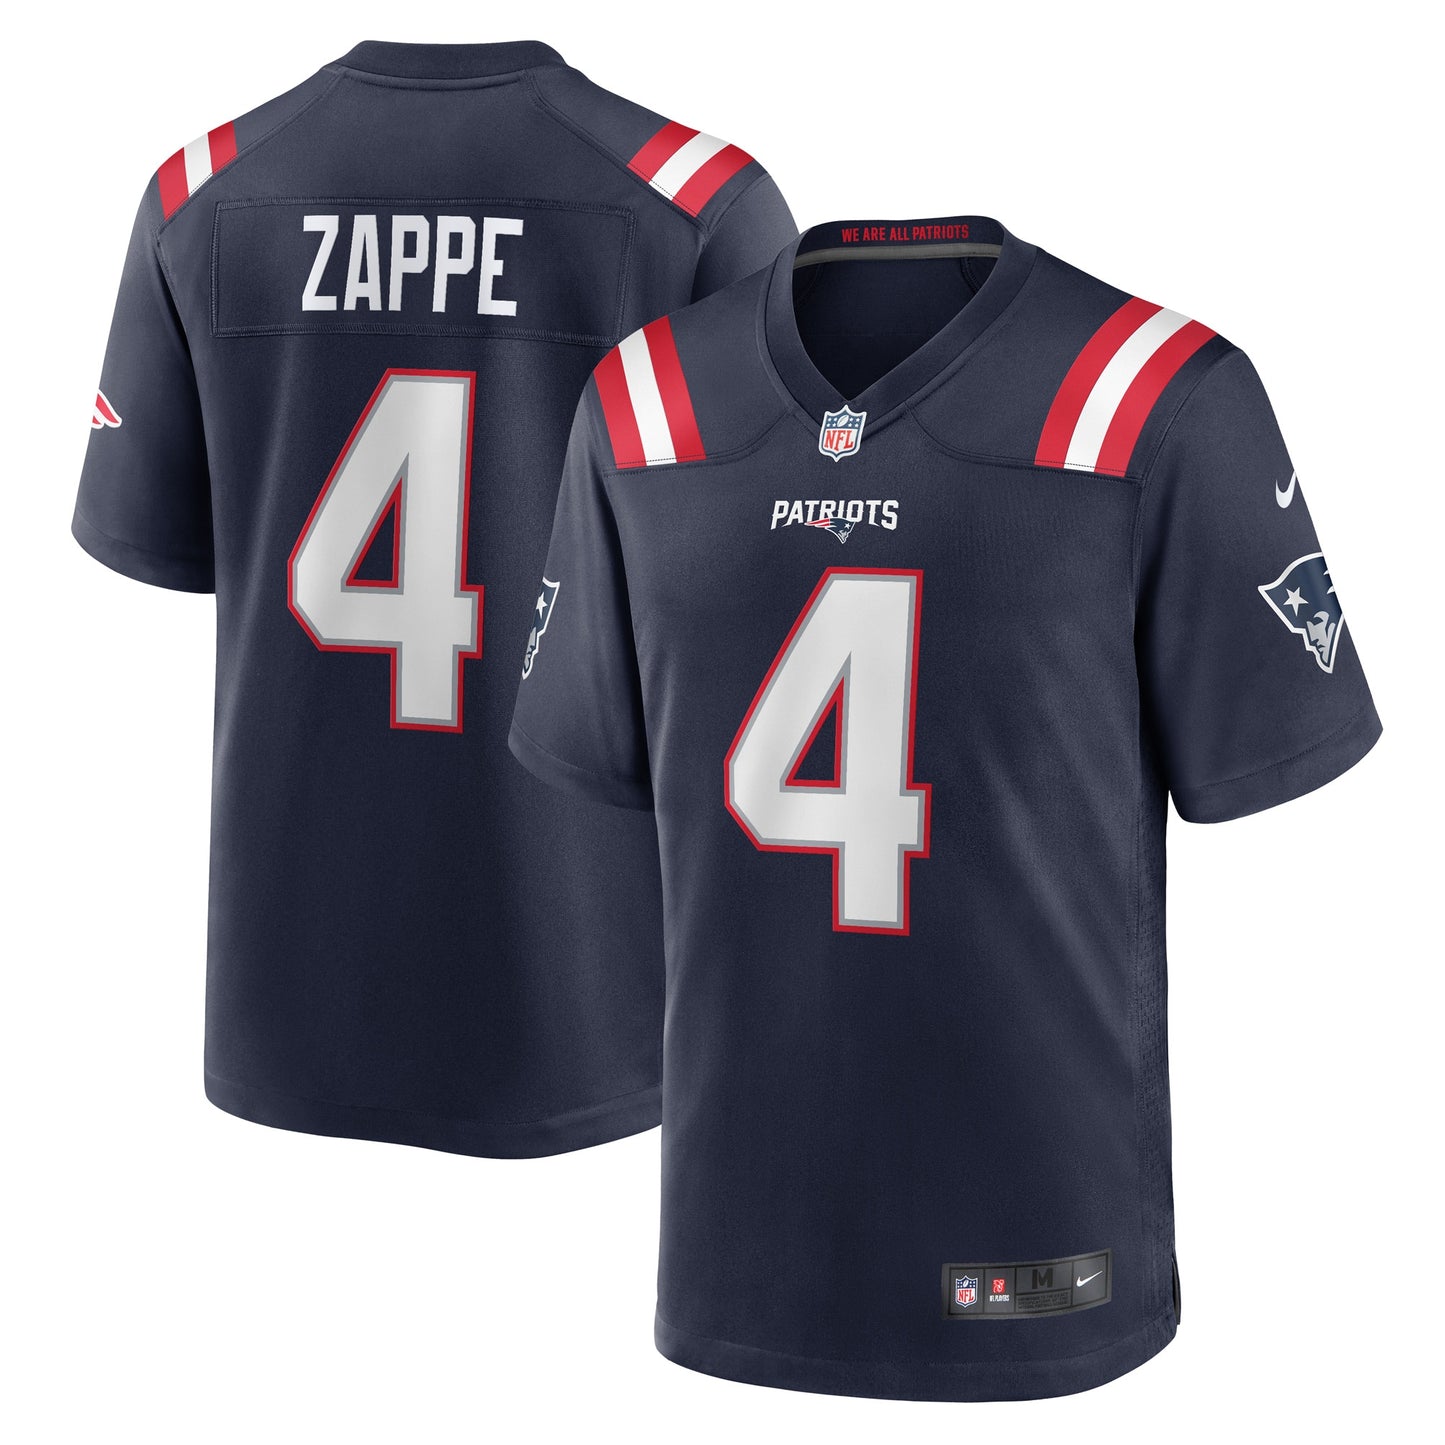 Bailey Zappe New England Patriots Nike Game Player Jersey - Navy